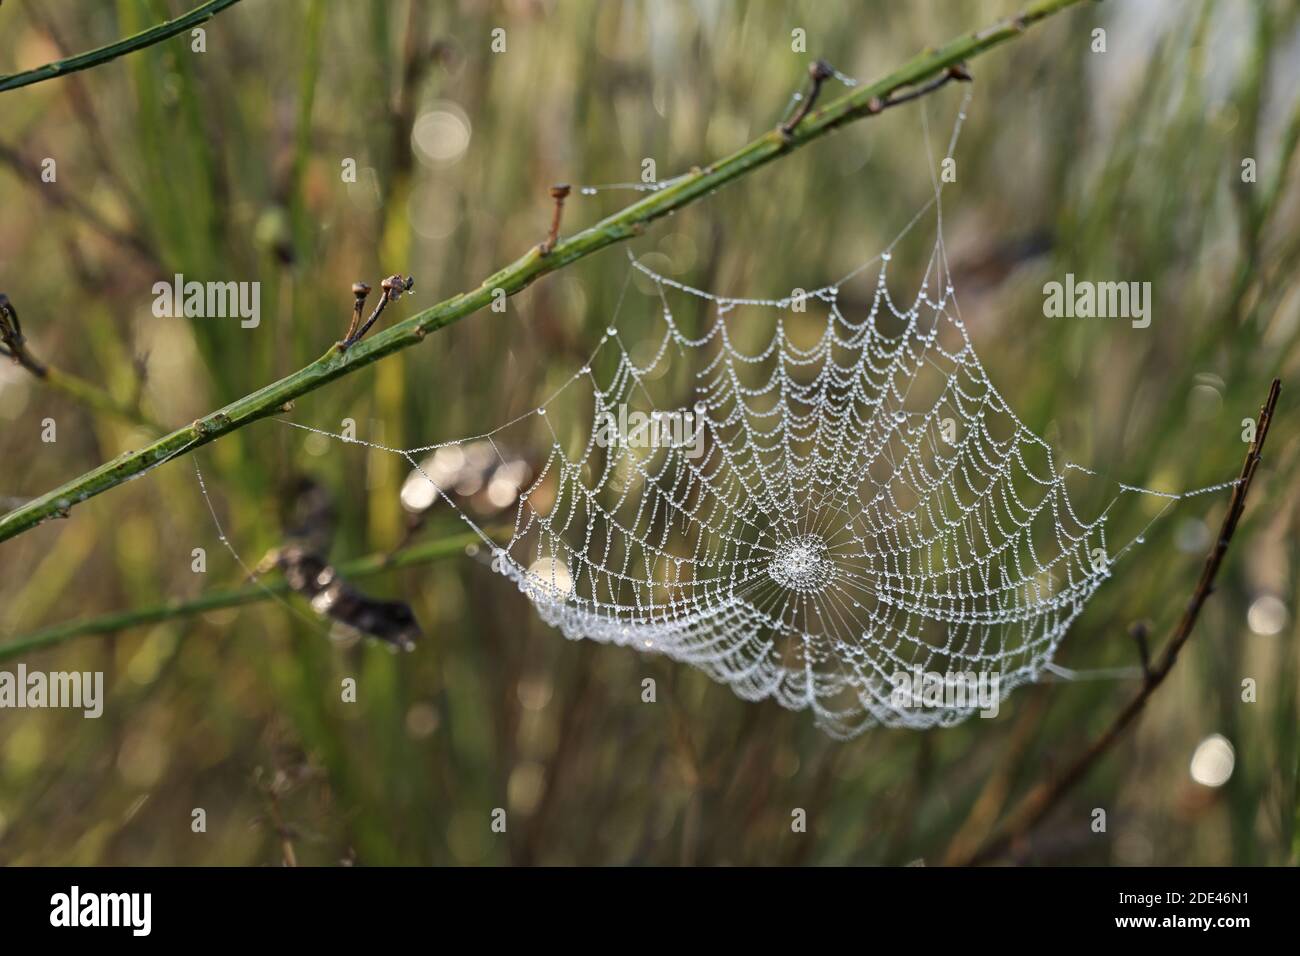 Spider web with dew drops between the stalks in a green meadow, selected focus, narrow depth of field Stock Photo